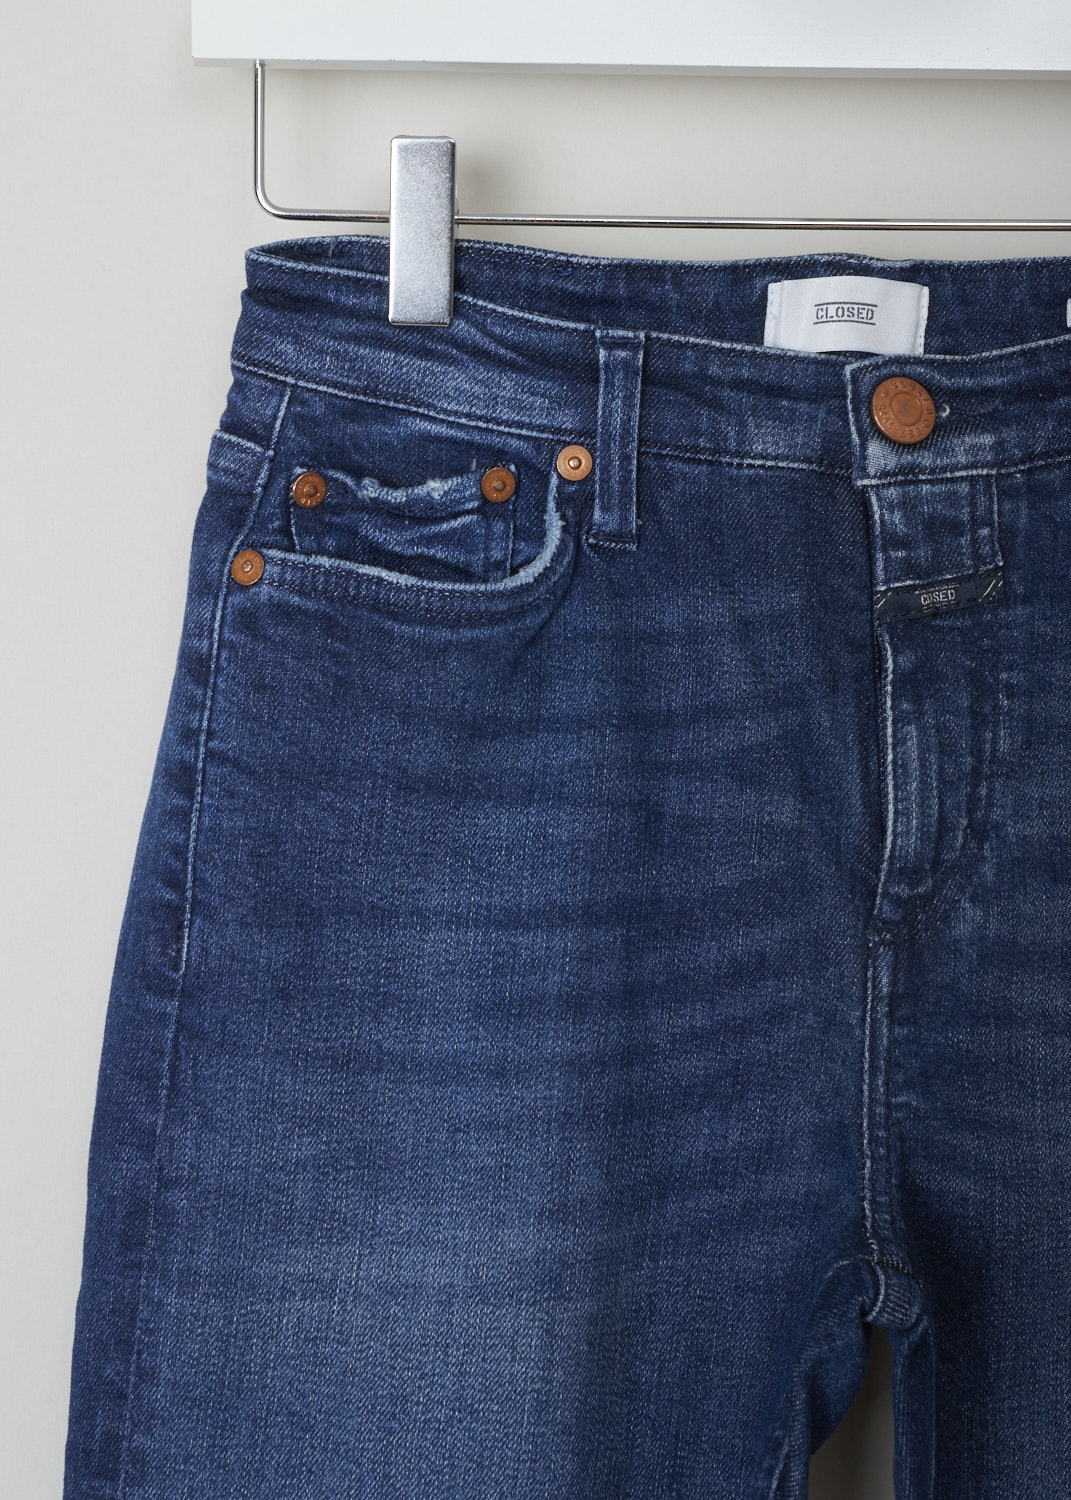 Closed, Mid-blue skinny high-waist lizzy jeans, lizzy_closed_C91099_006_6M_6M, blue, detail, Mid-blue 5-pocket jeans comes in a skinny, and high-waist fit. The cotton blend used for this model is know for its high elasticity.